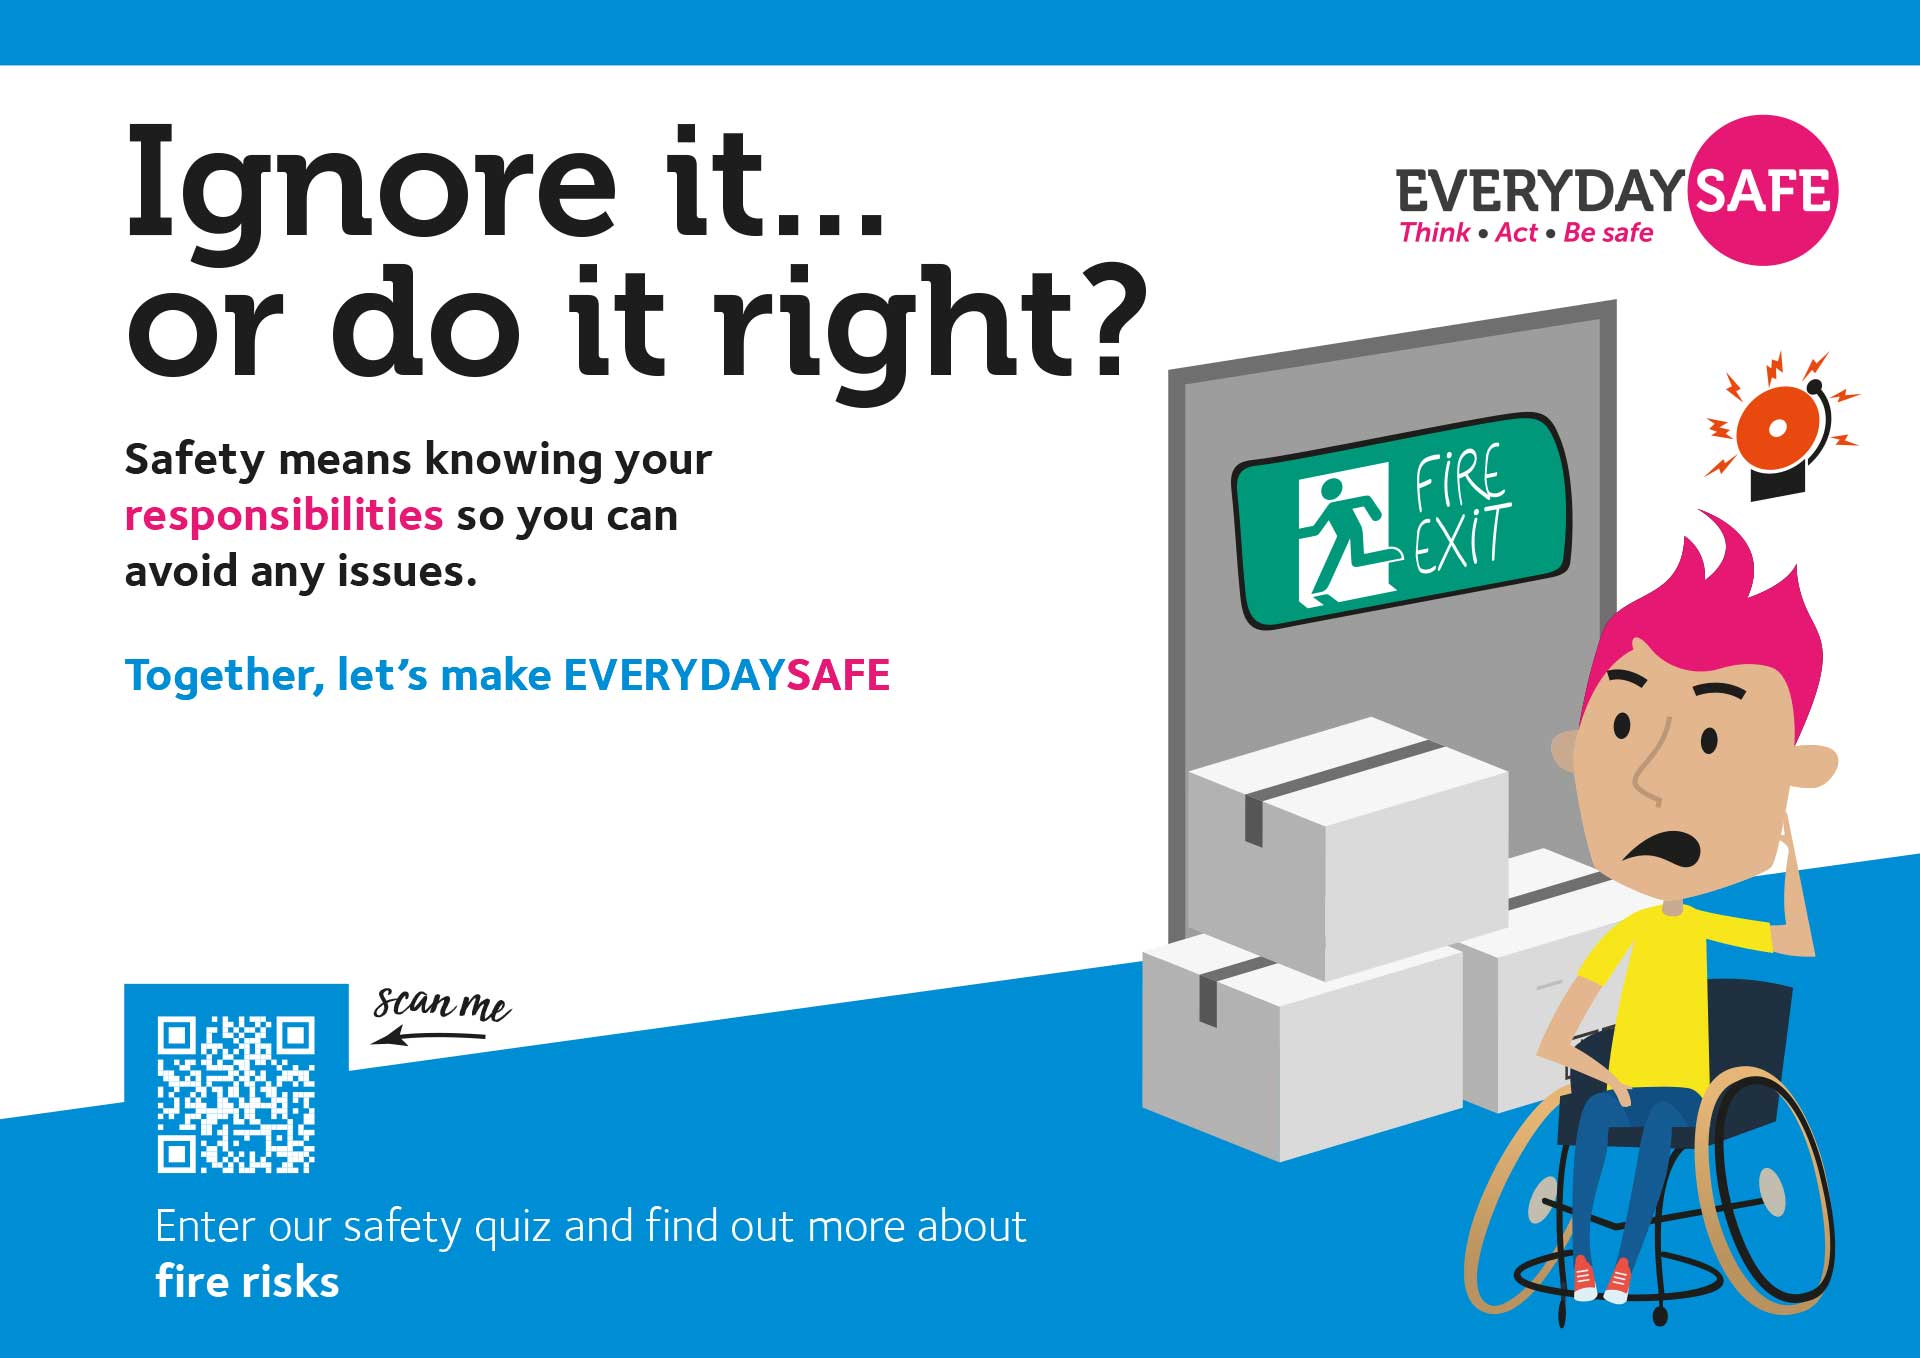 EveryDaySafe poster highlighting the value of responsibility